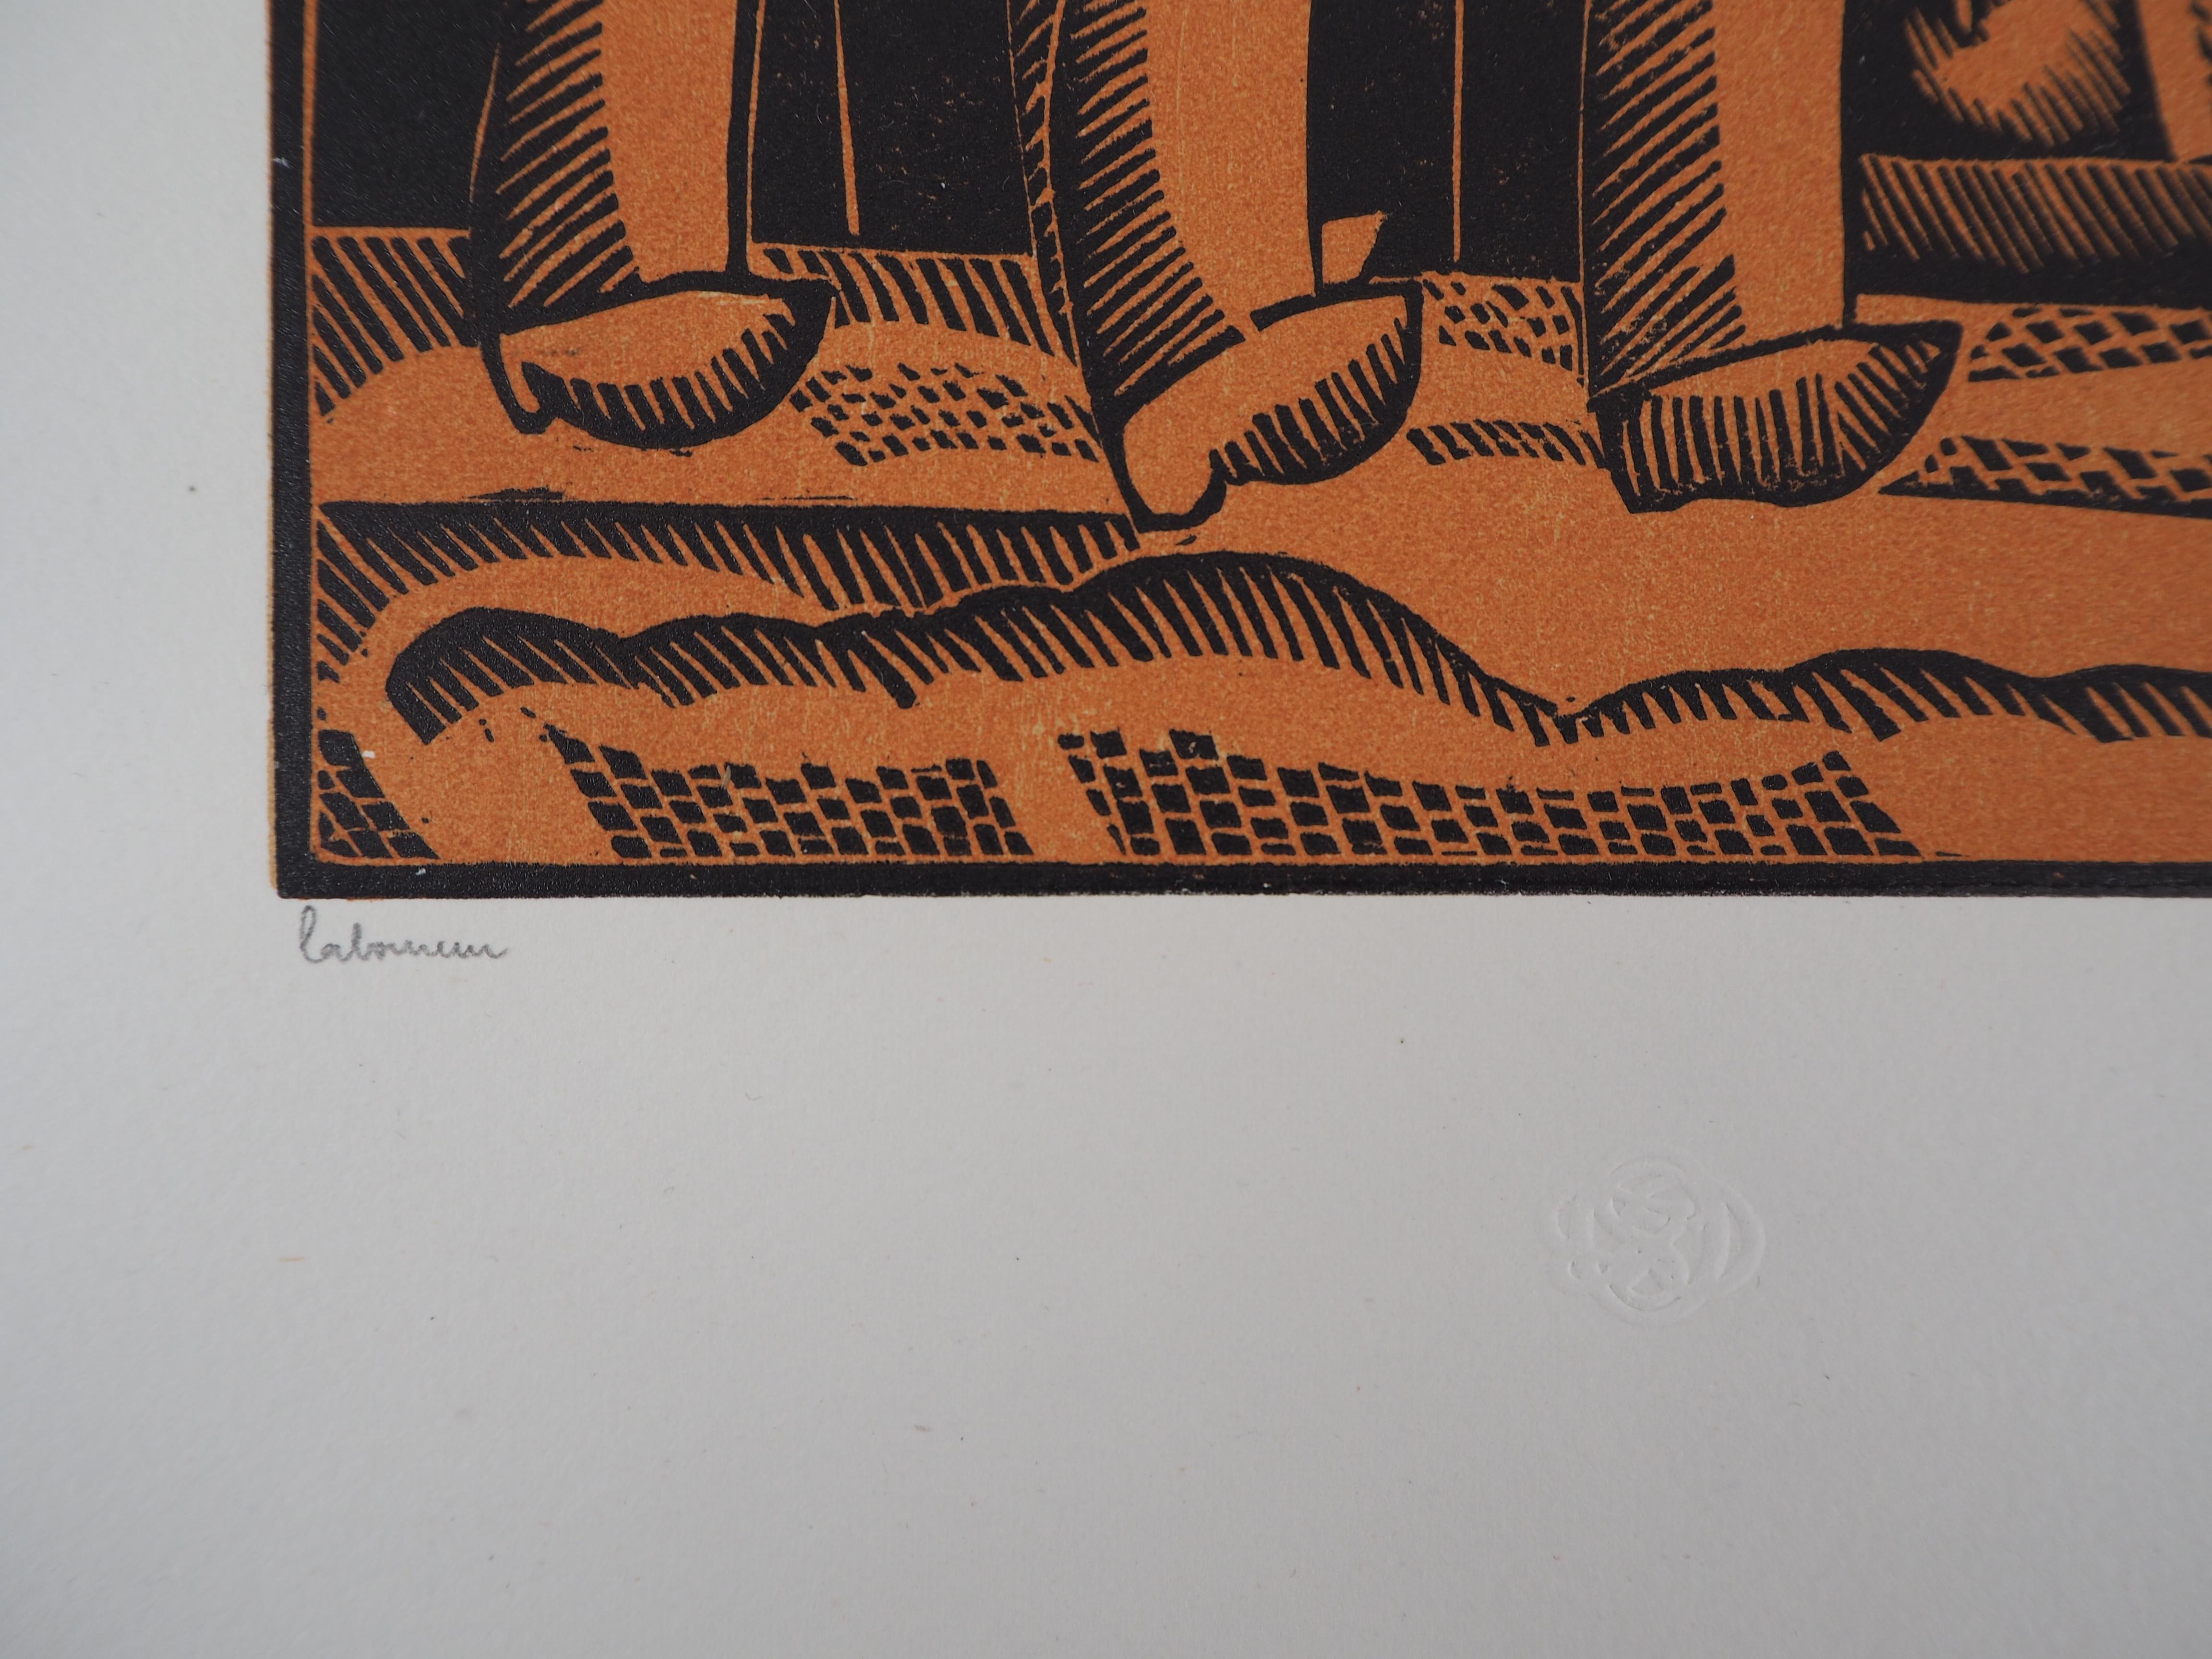 Cafe des Allies - Original woodcut, Handsigned and Numbered /105 - Ref #L725 - Brown Figurative Print by Jean-Emile Laboureur